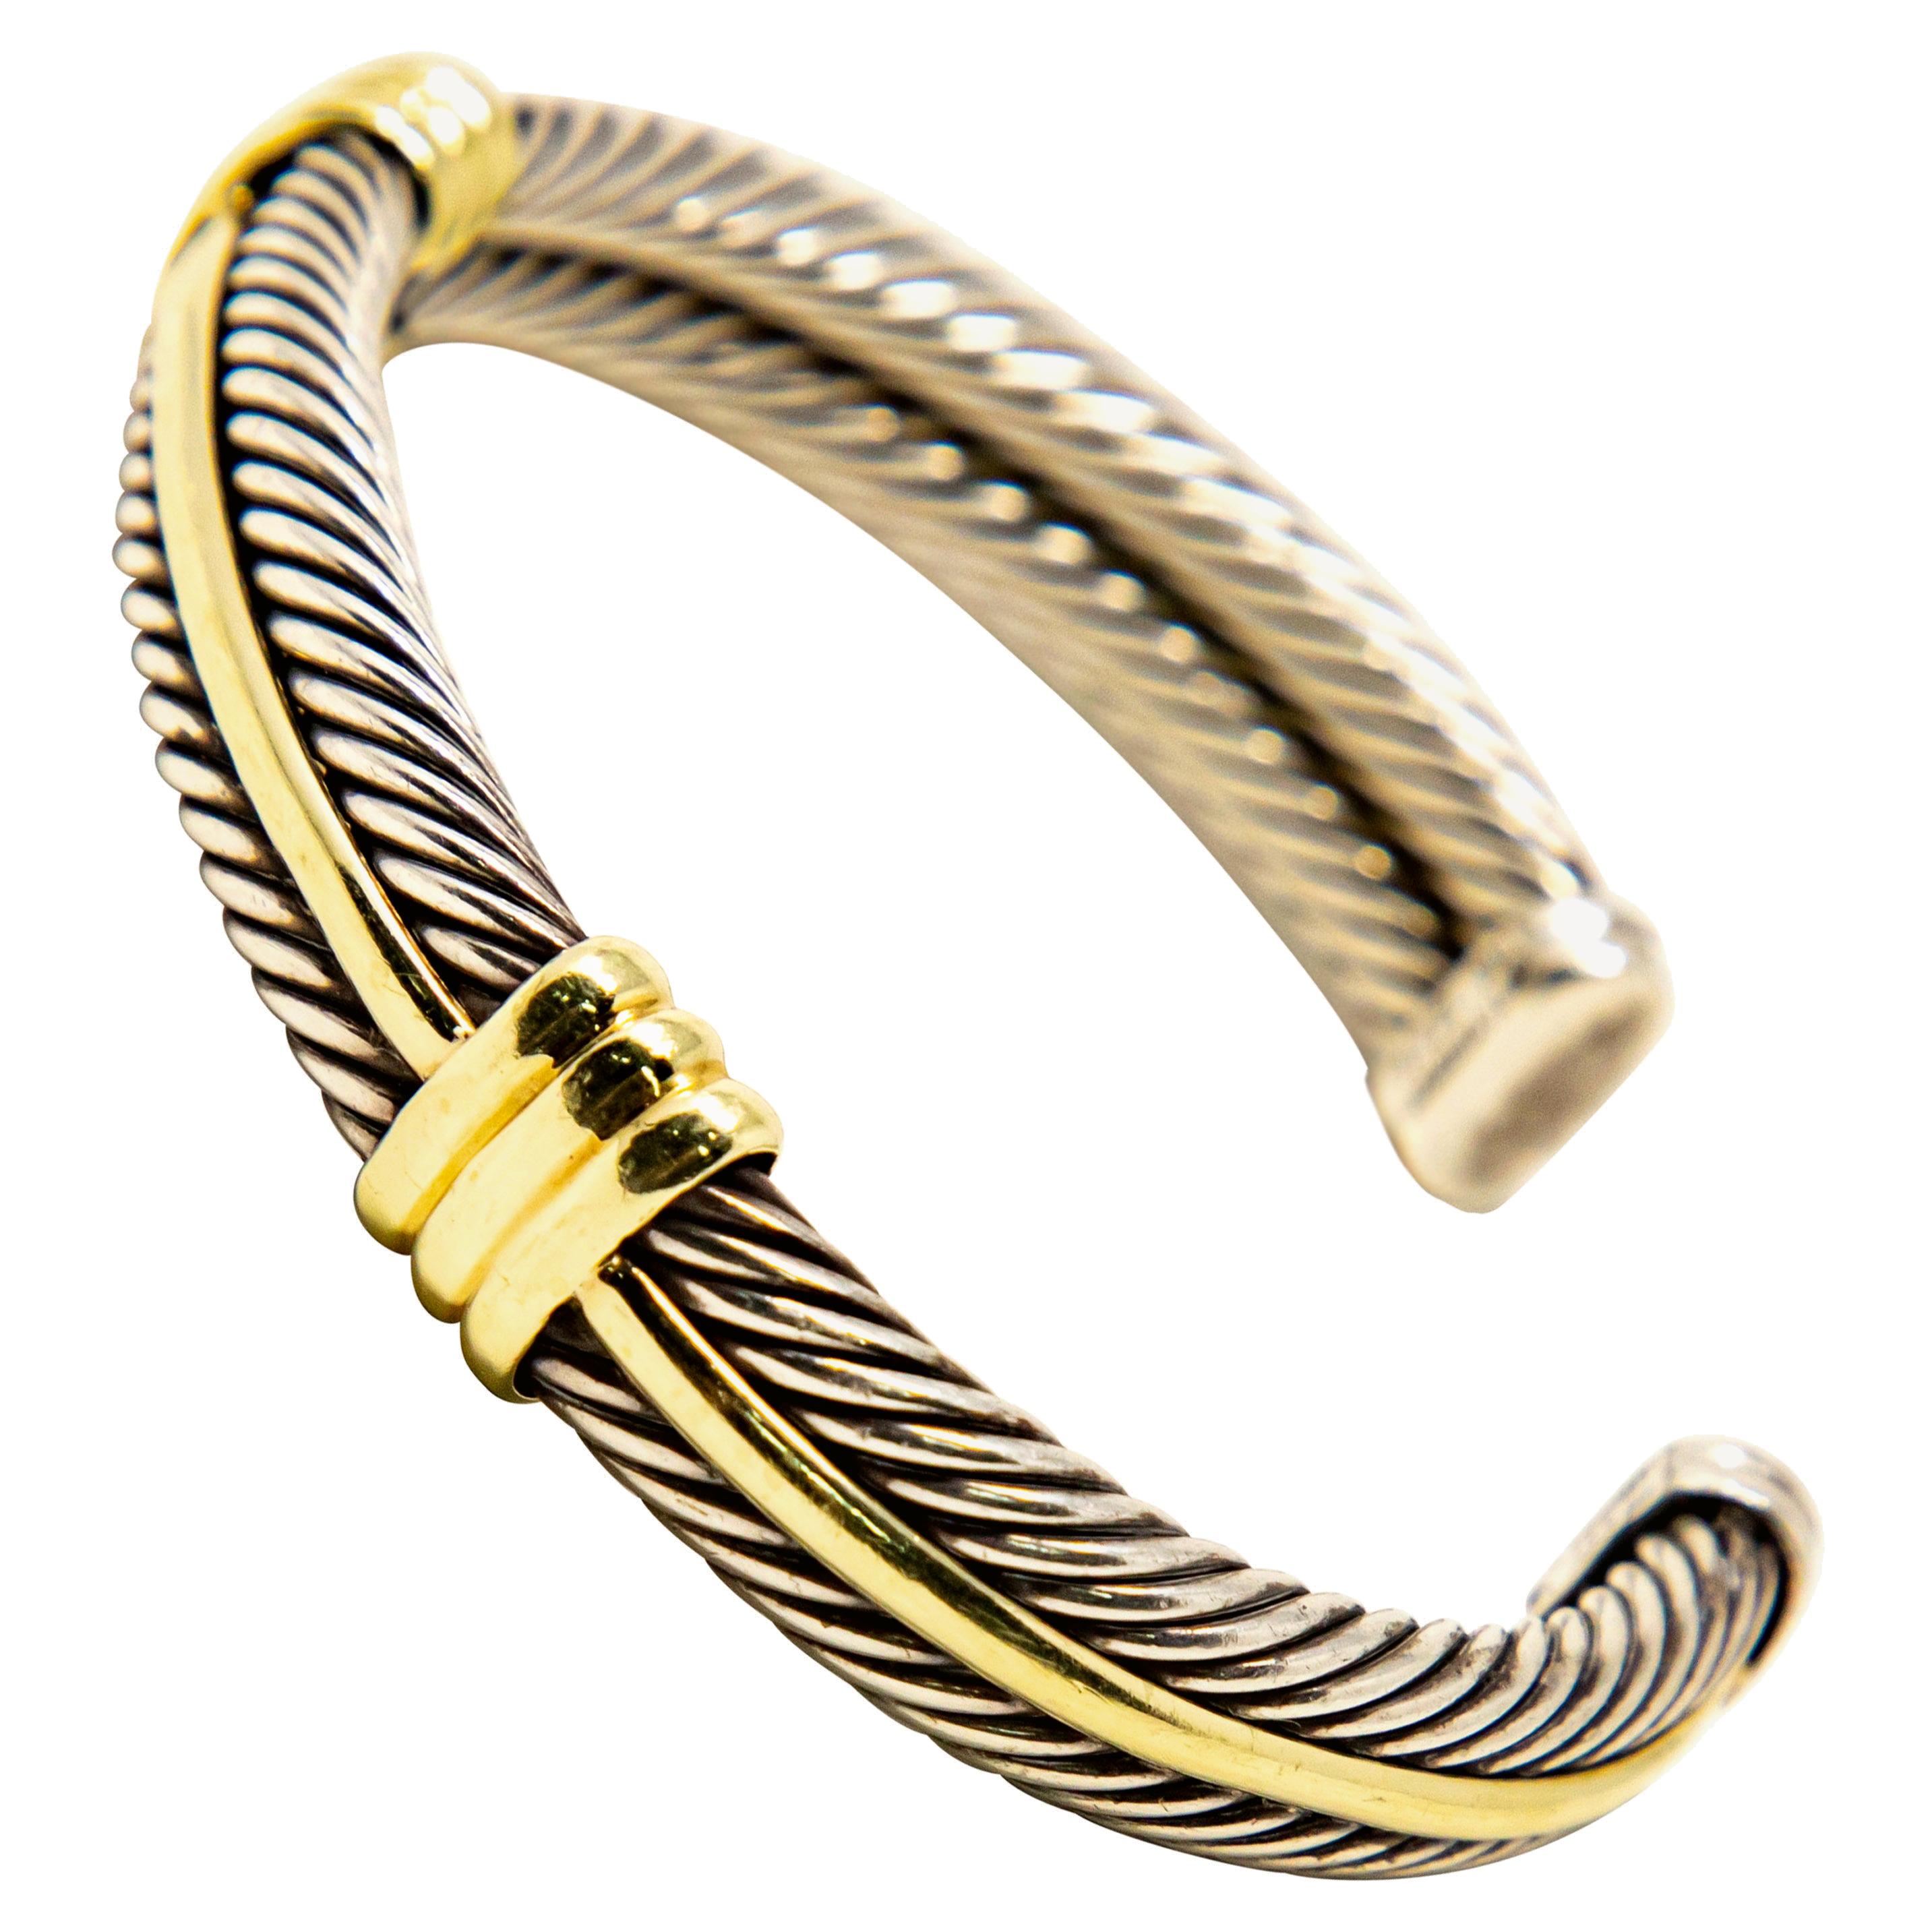 Offering this impeccable David Yurman cuff bracelet. Made of sterling silver that has been twisted, and 14-karat gold accenting this gorgeous bracelet. Cuff is marked, © D. YURMAN, 14K, 925.